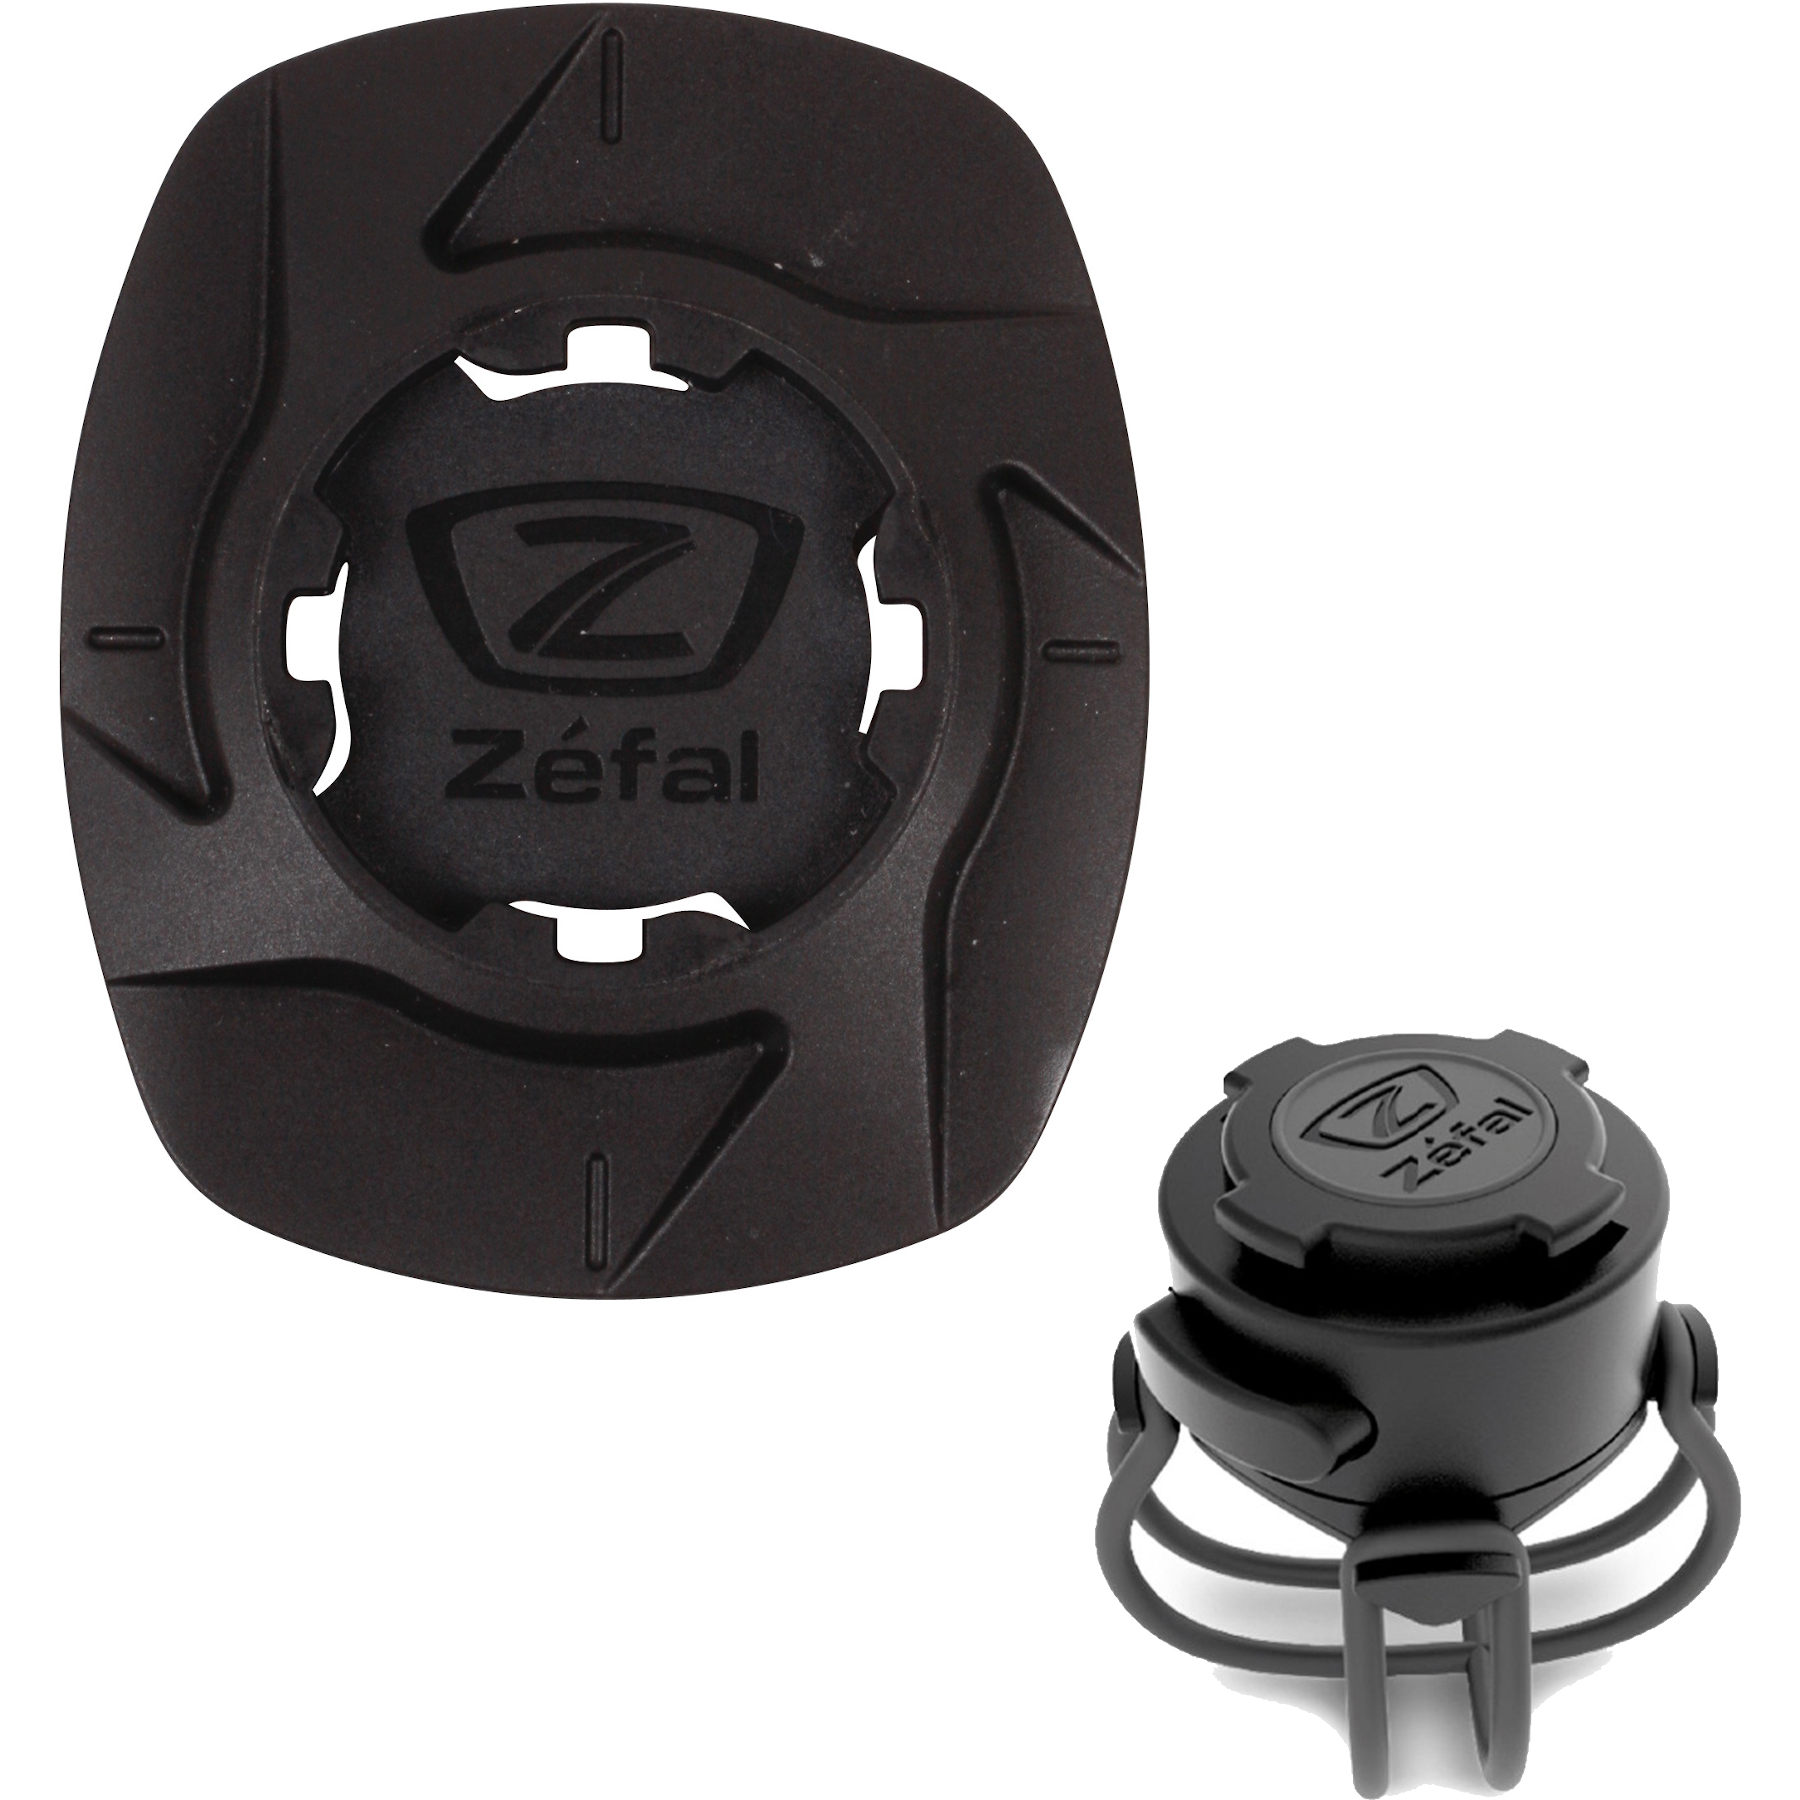 Picture of Zéfal Bike Kit Universal Phone Adapter